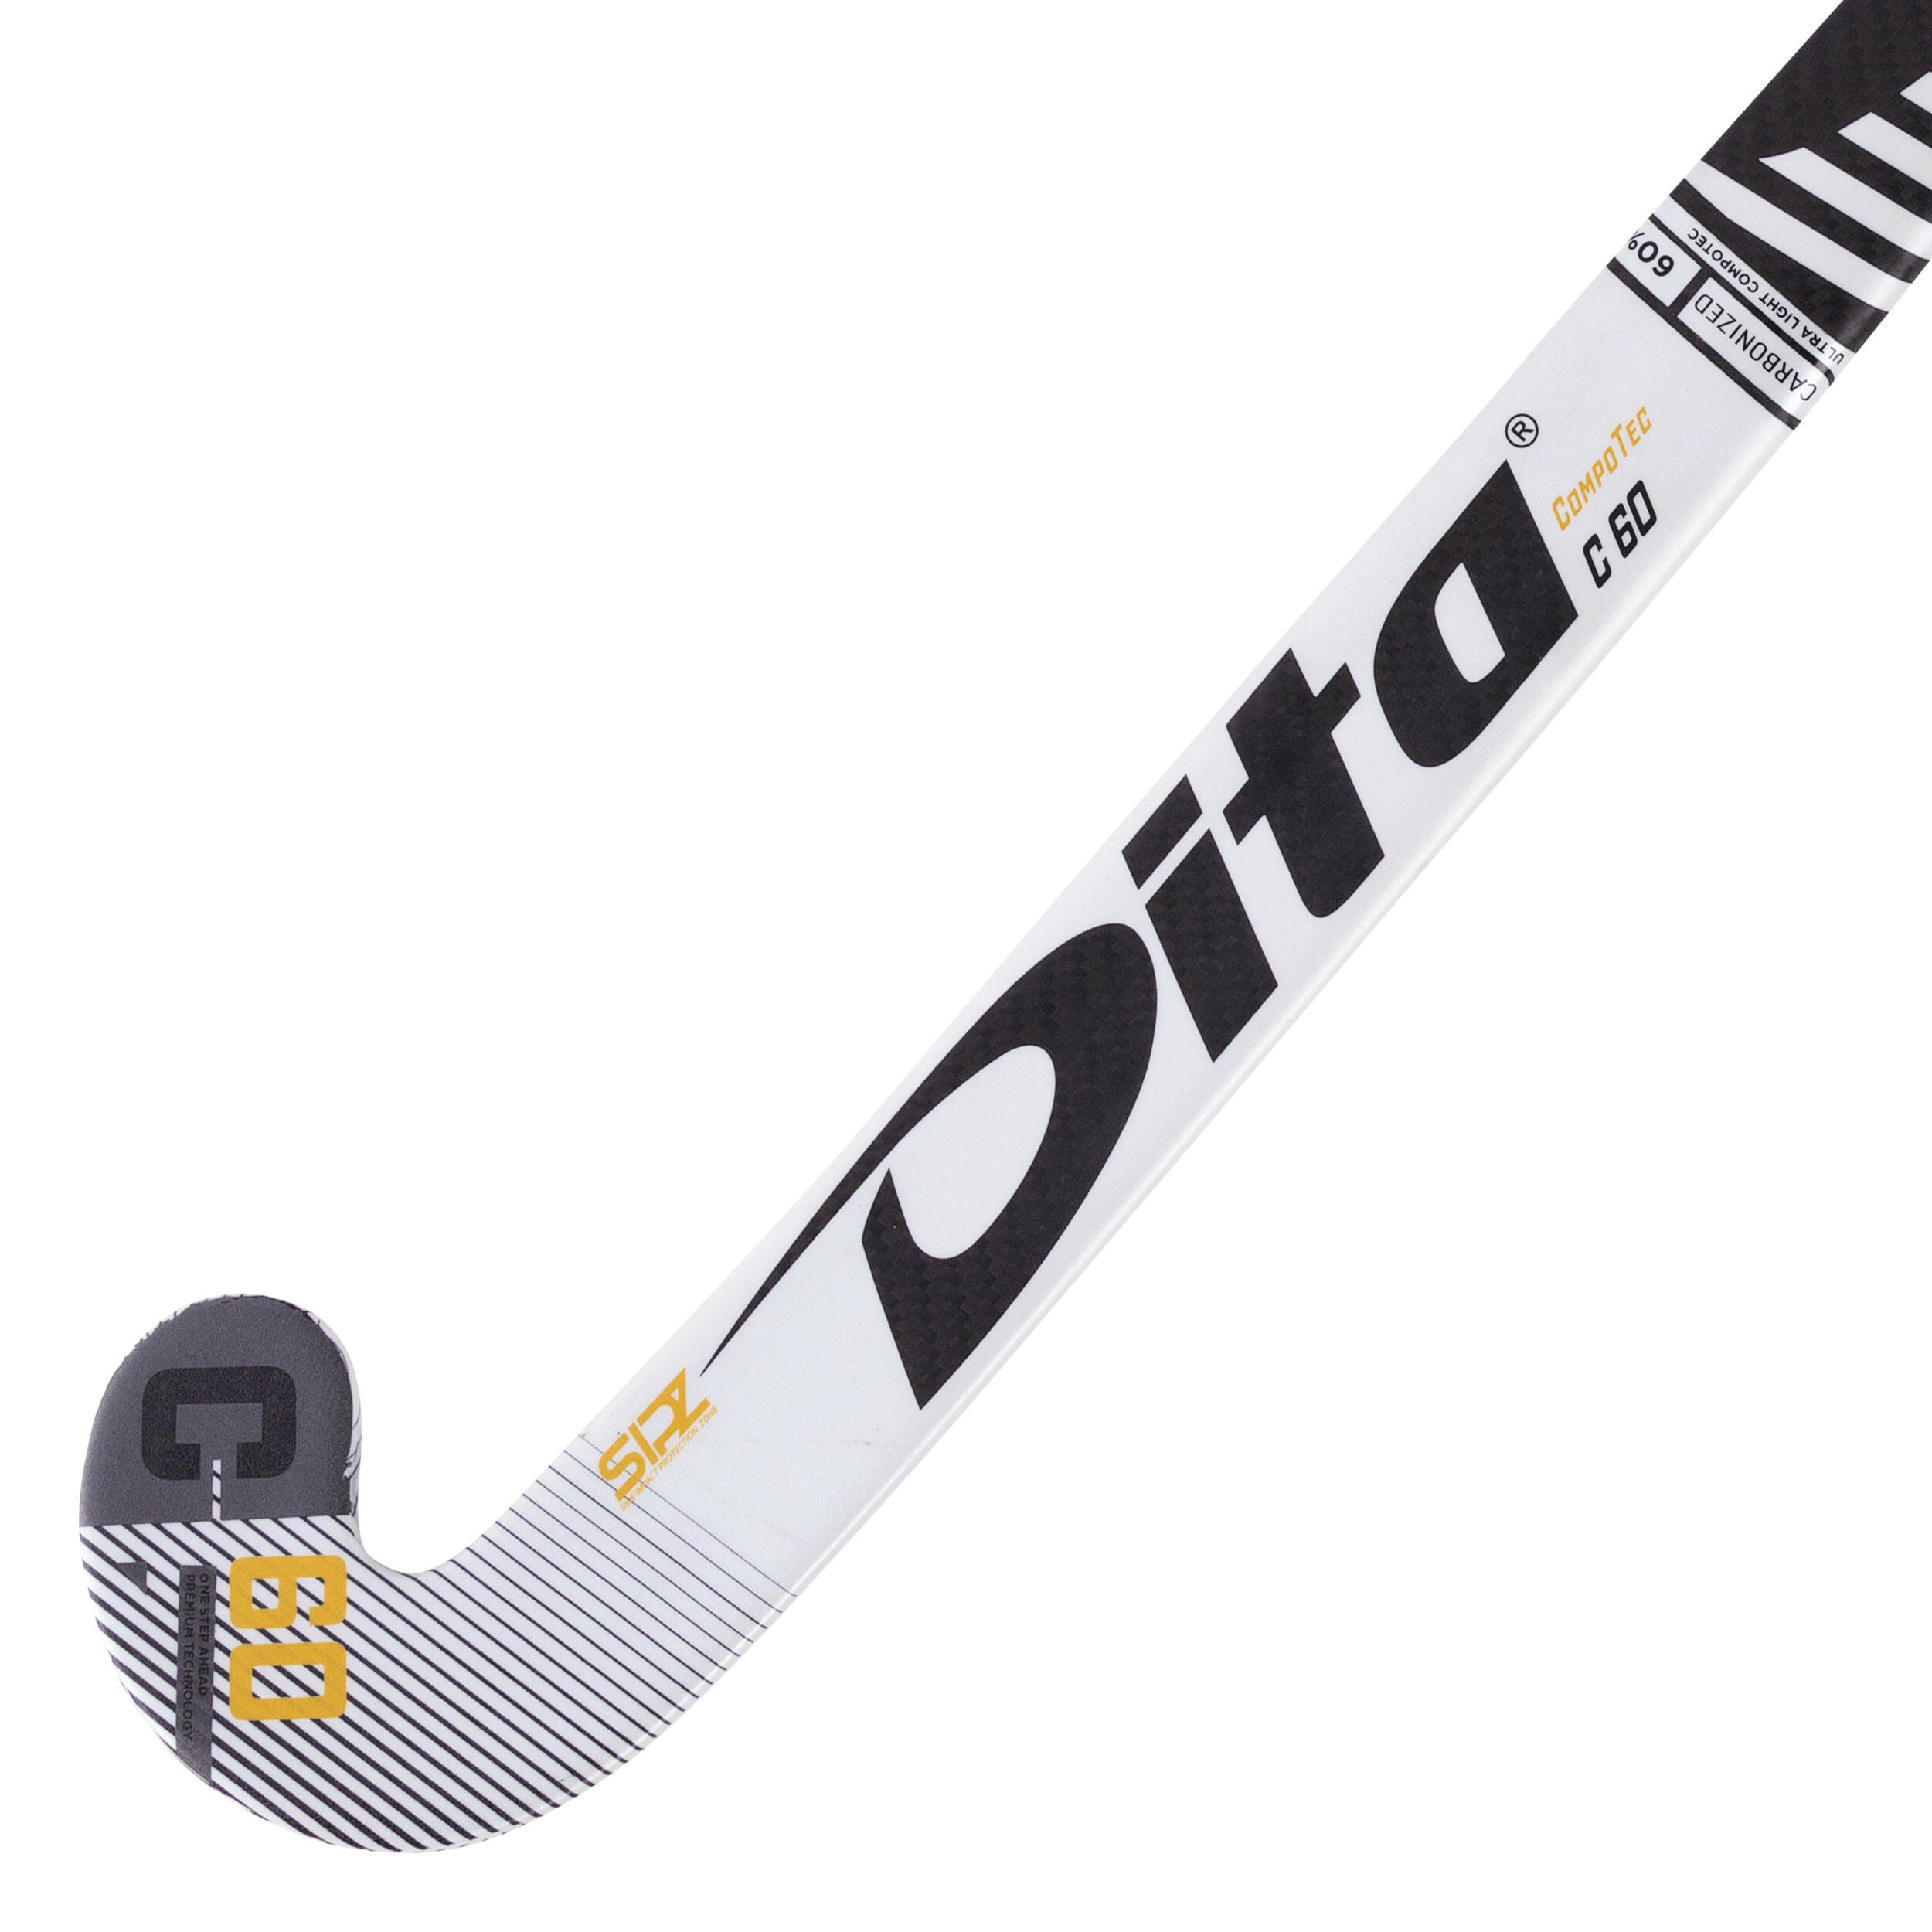 Adult Intermediate 60% Carbon Low Bow Field Hockey Stick CompotecC60 - White/Black 3/12